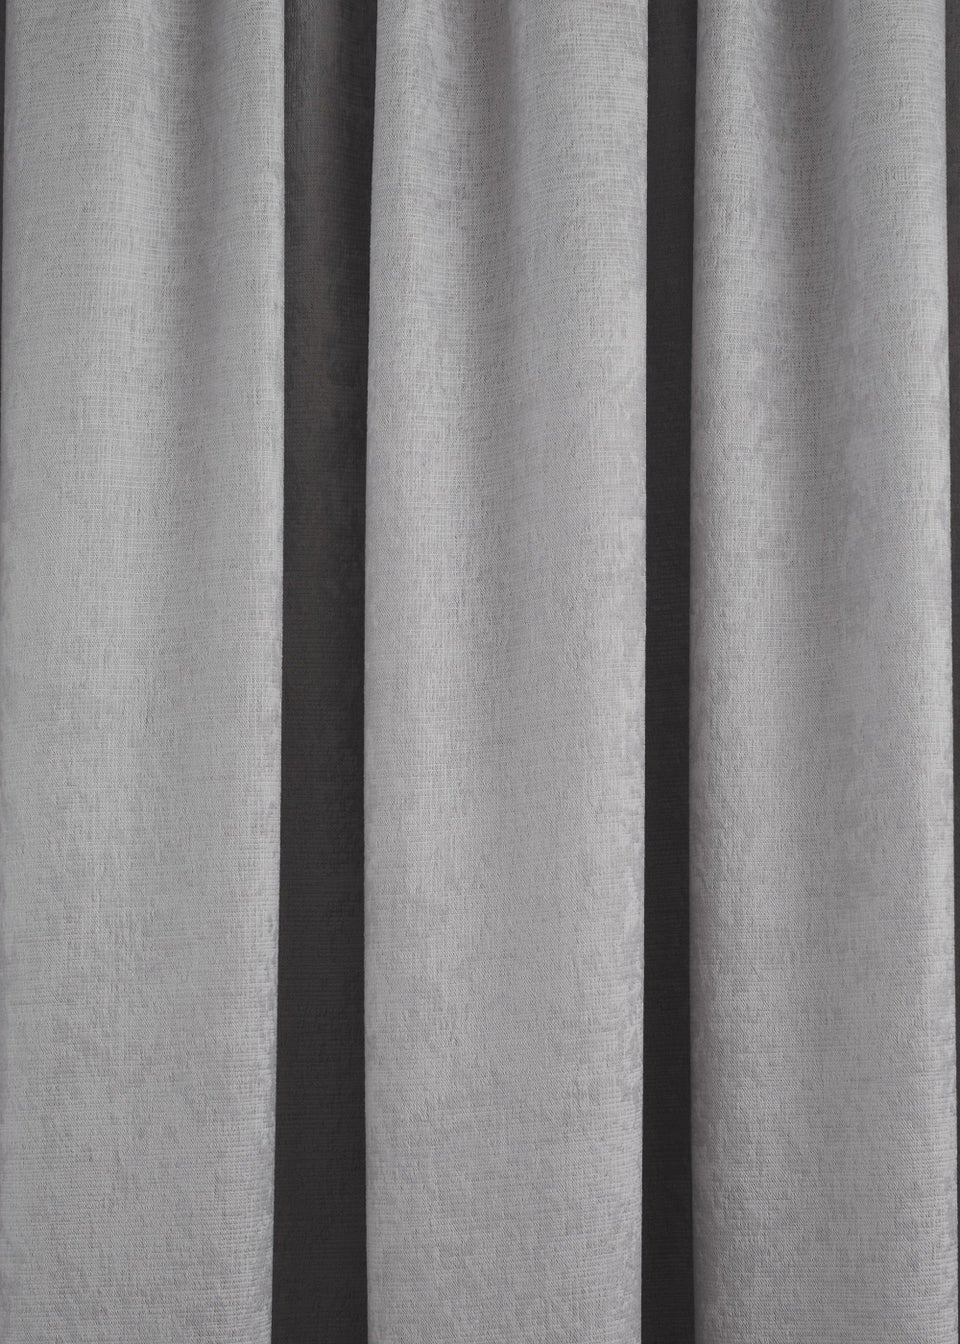 Fusion Galaxy Pair of Pencil Pleat Curtains